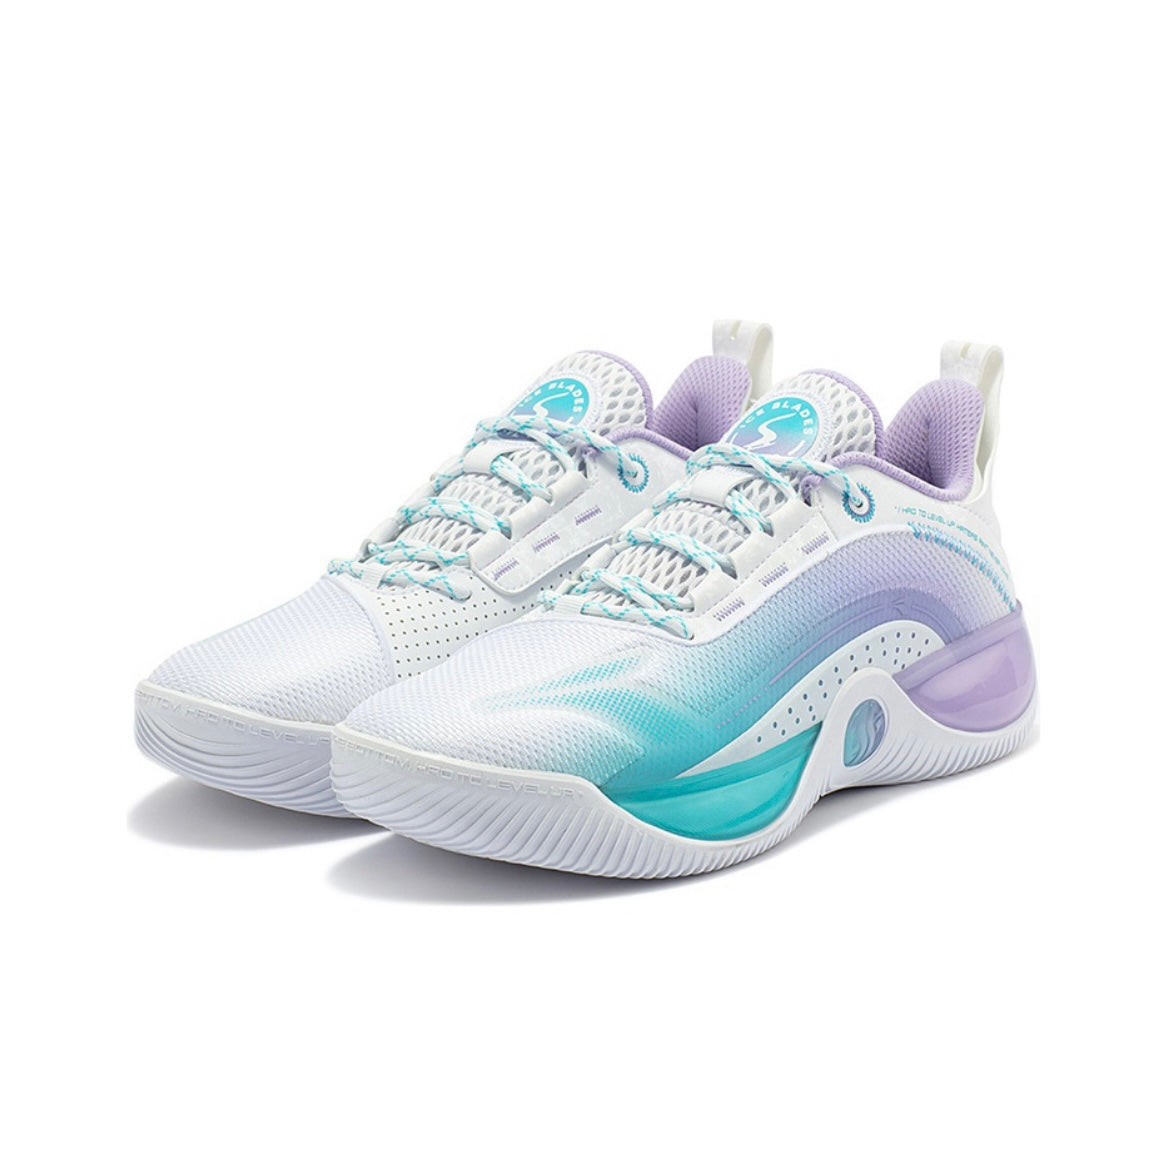 361 Degrees LVL Up Basketball Shoes - White/Blue